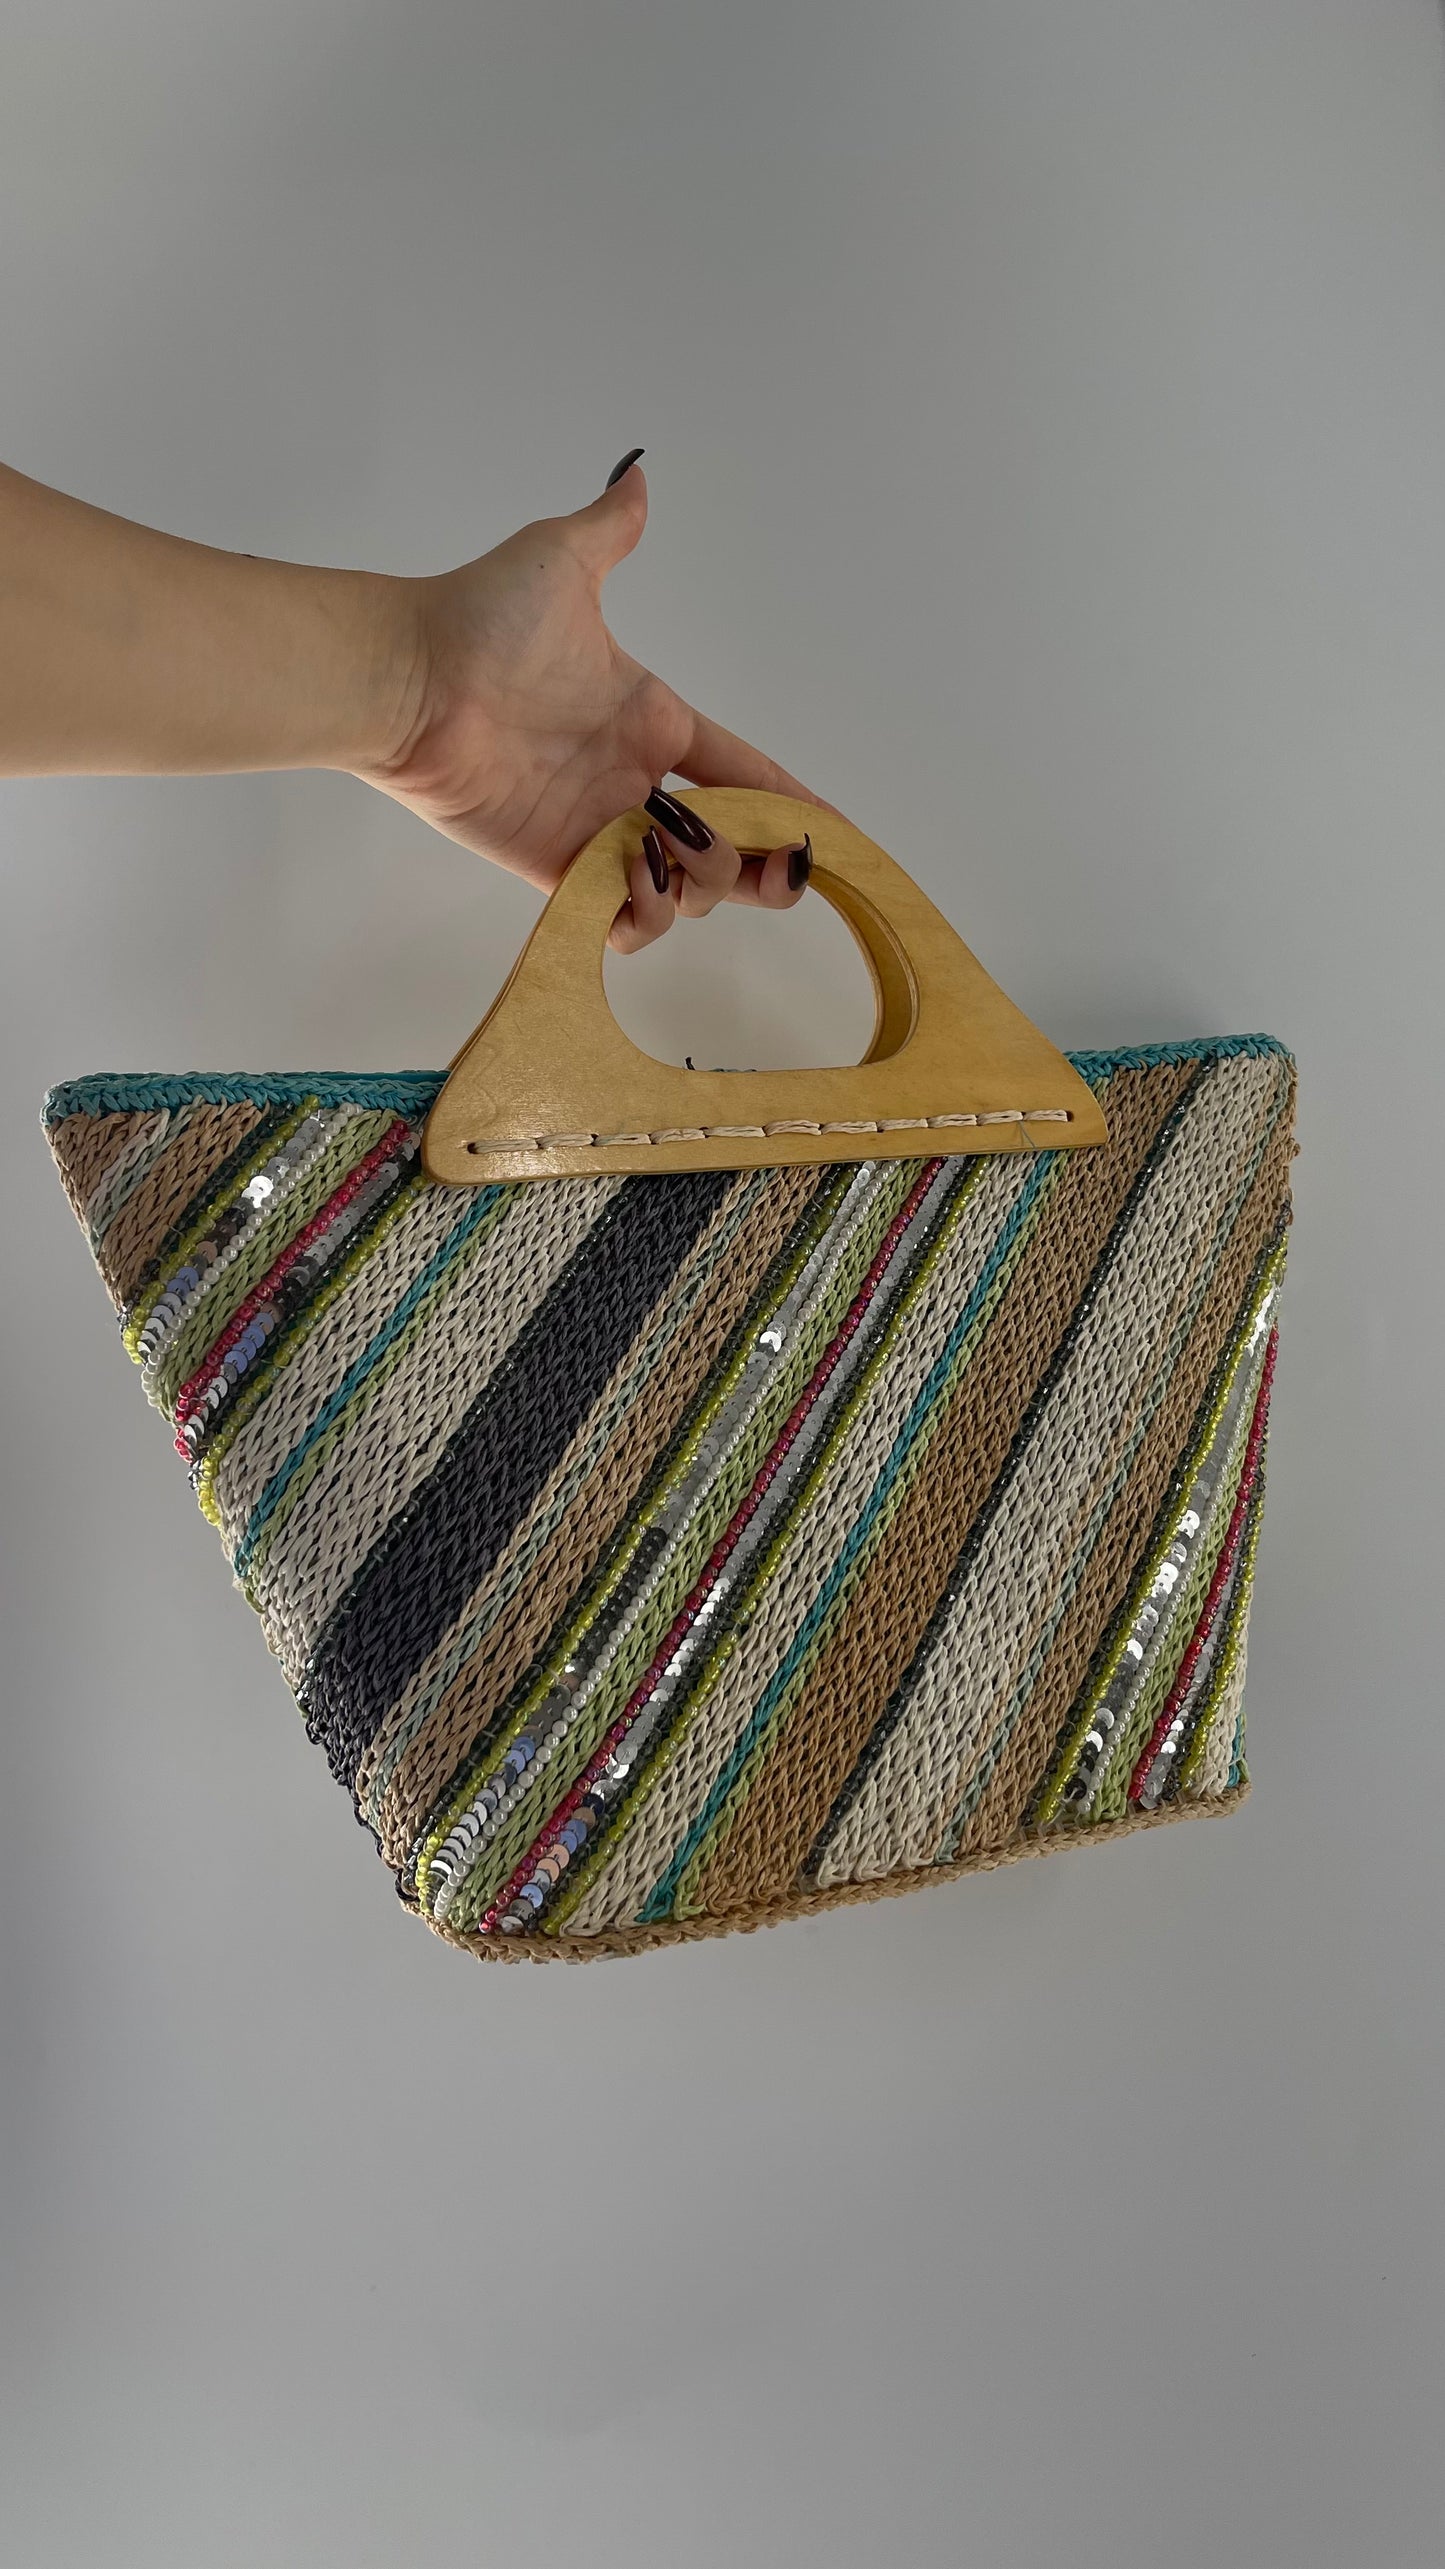 Vintage Woven Straw Purse with Sequins and Beaded Details